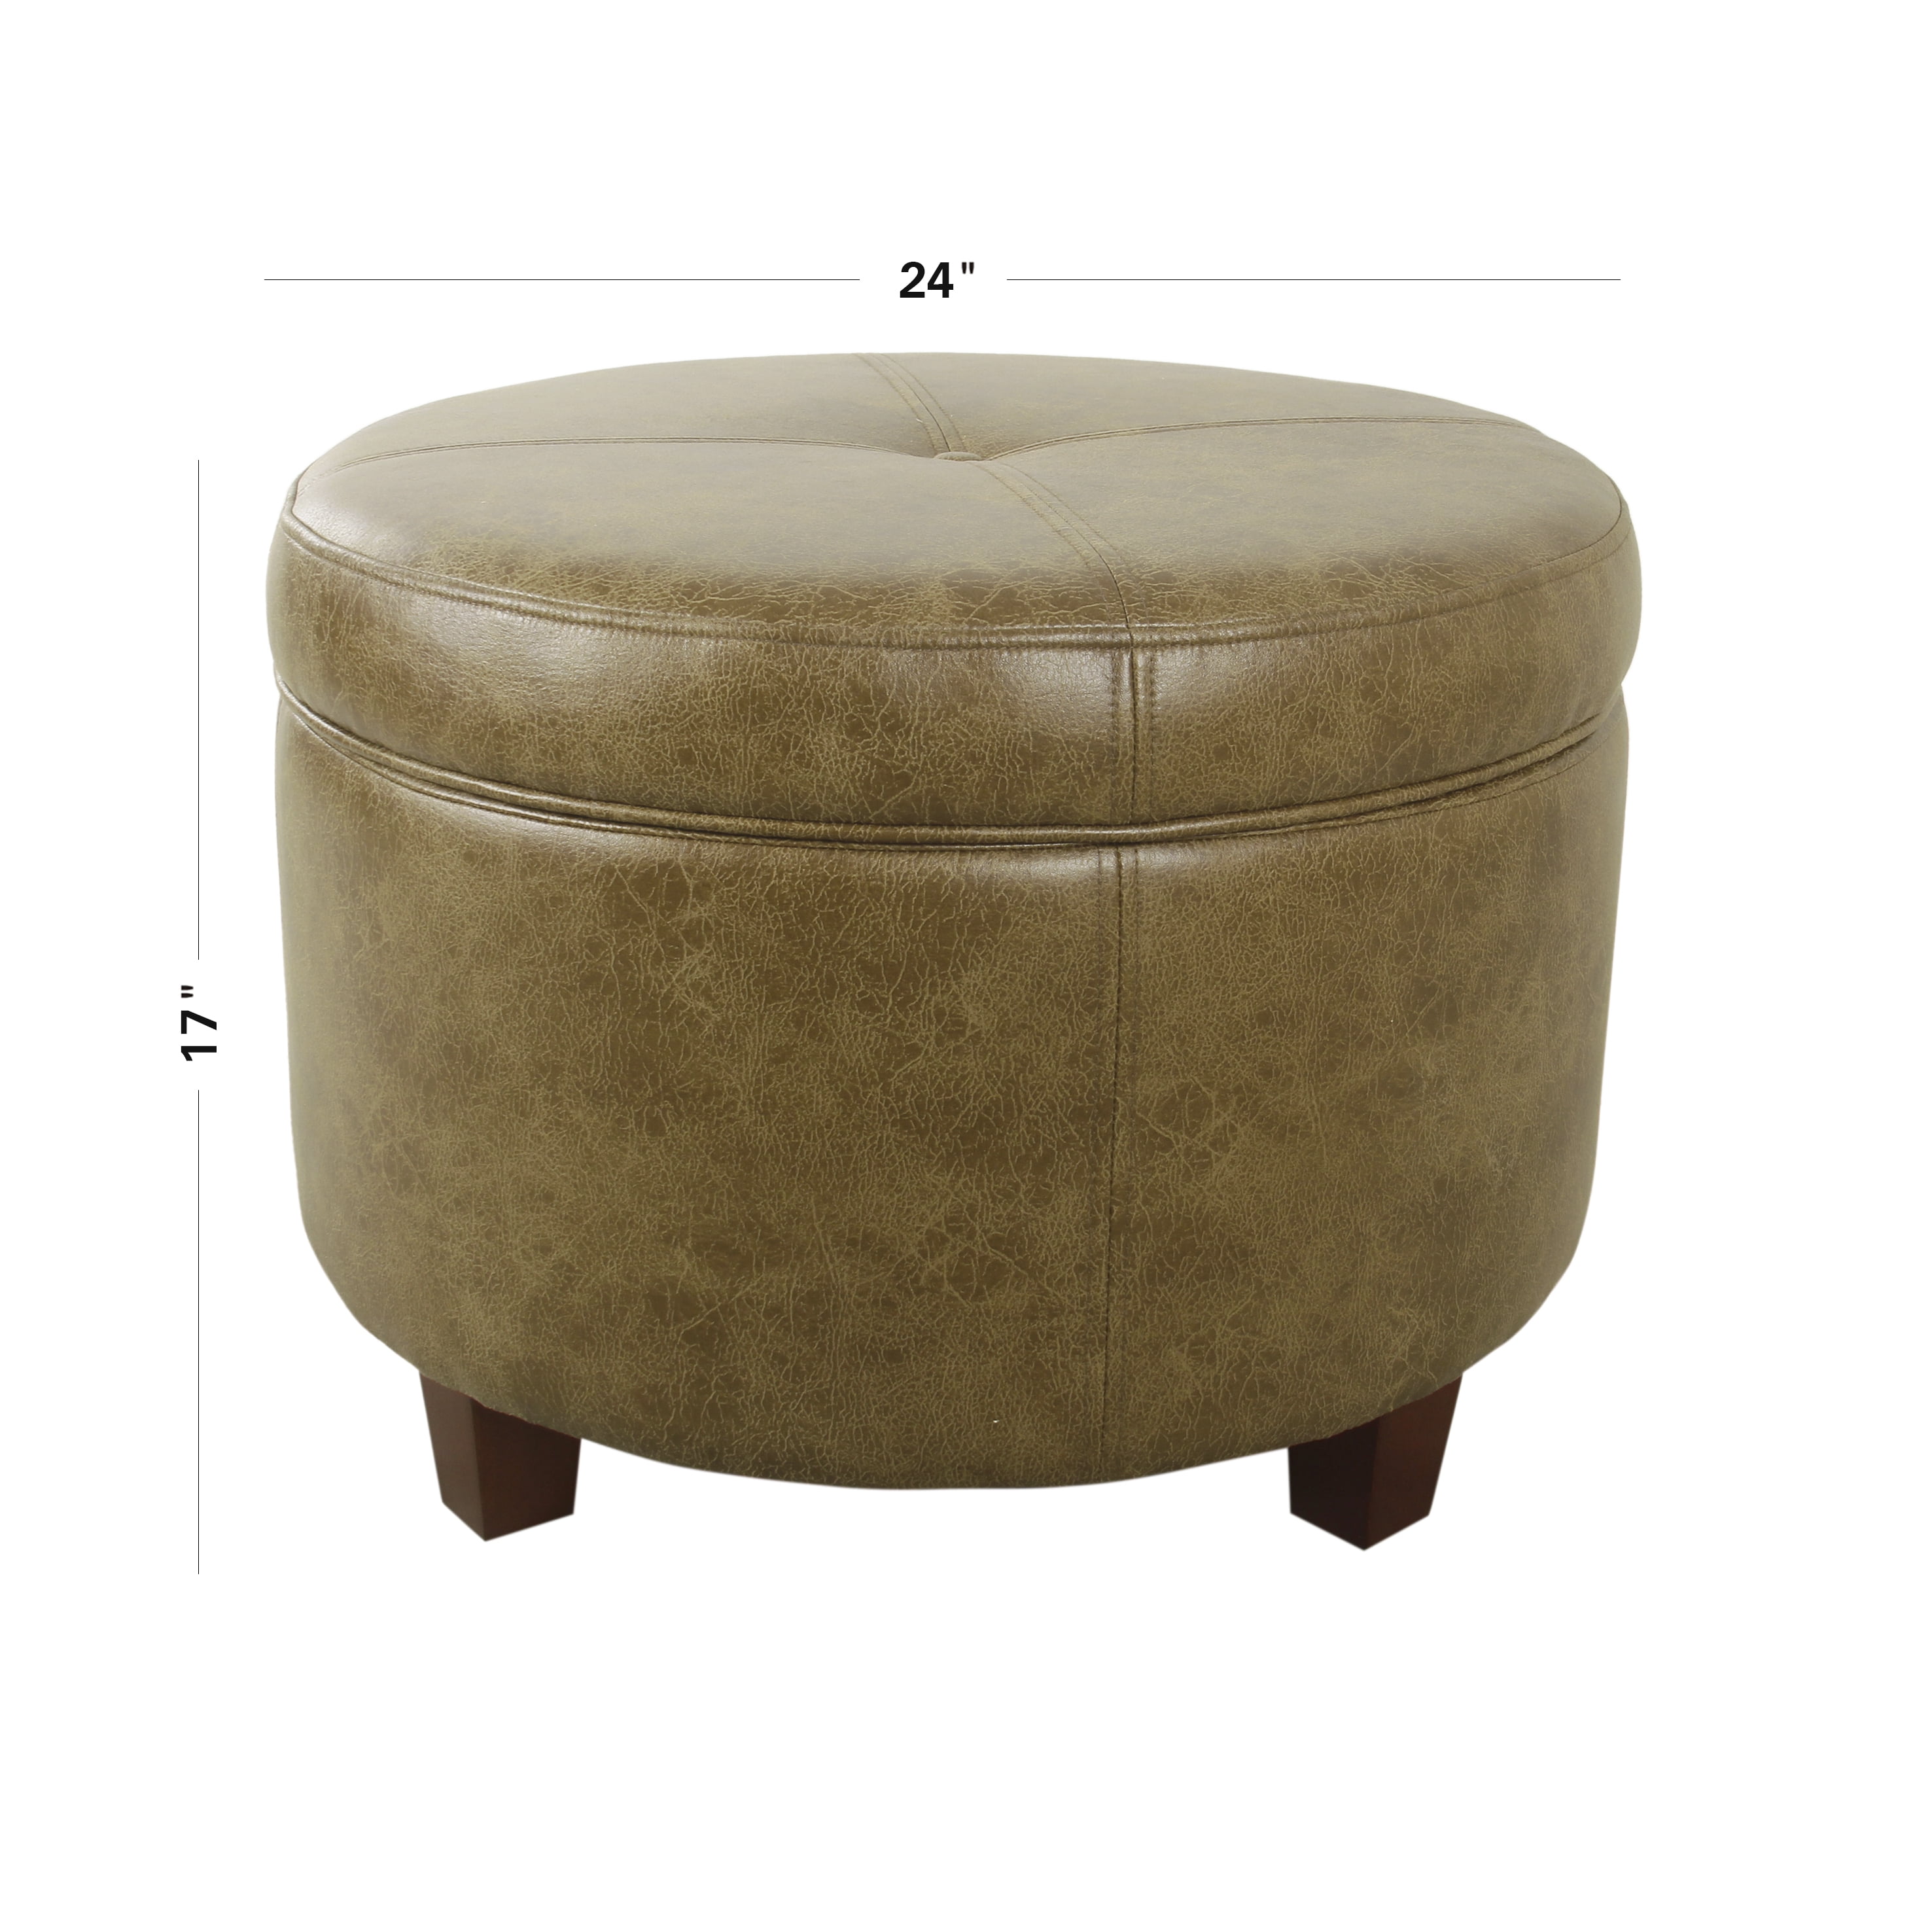 Homepop Large Leatherette Storage, Tufted Round Leather Storage Ottoman